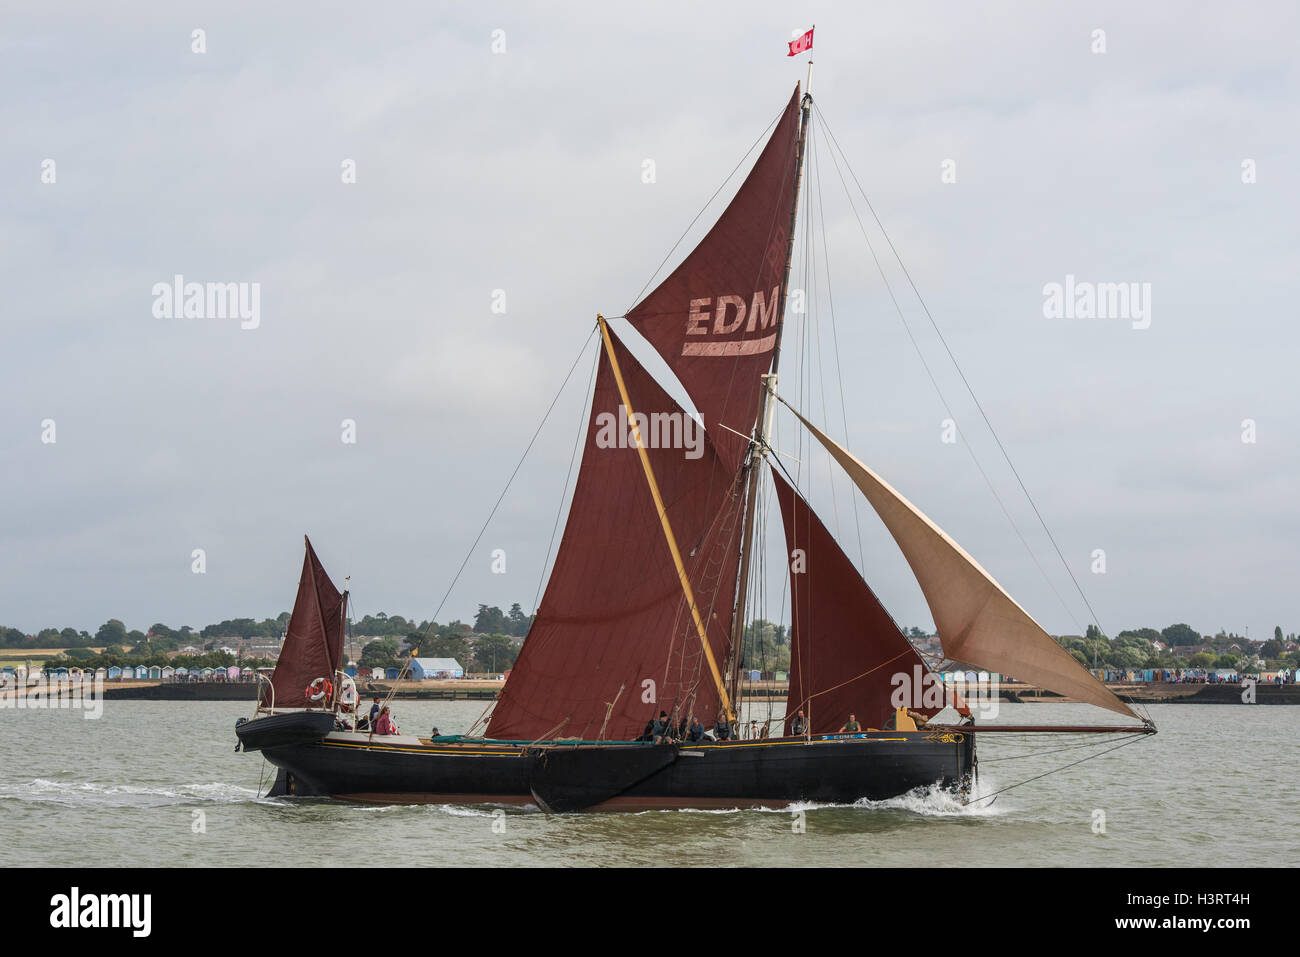 Thames sailing barge Edme in the Colne estuary off Brightlingsea at the start of a race. Stock Photo